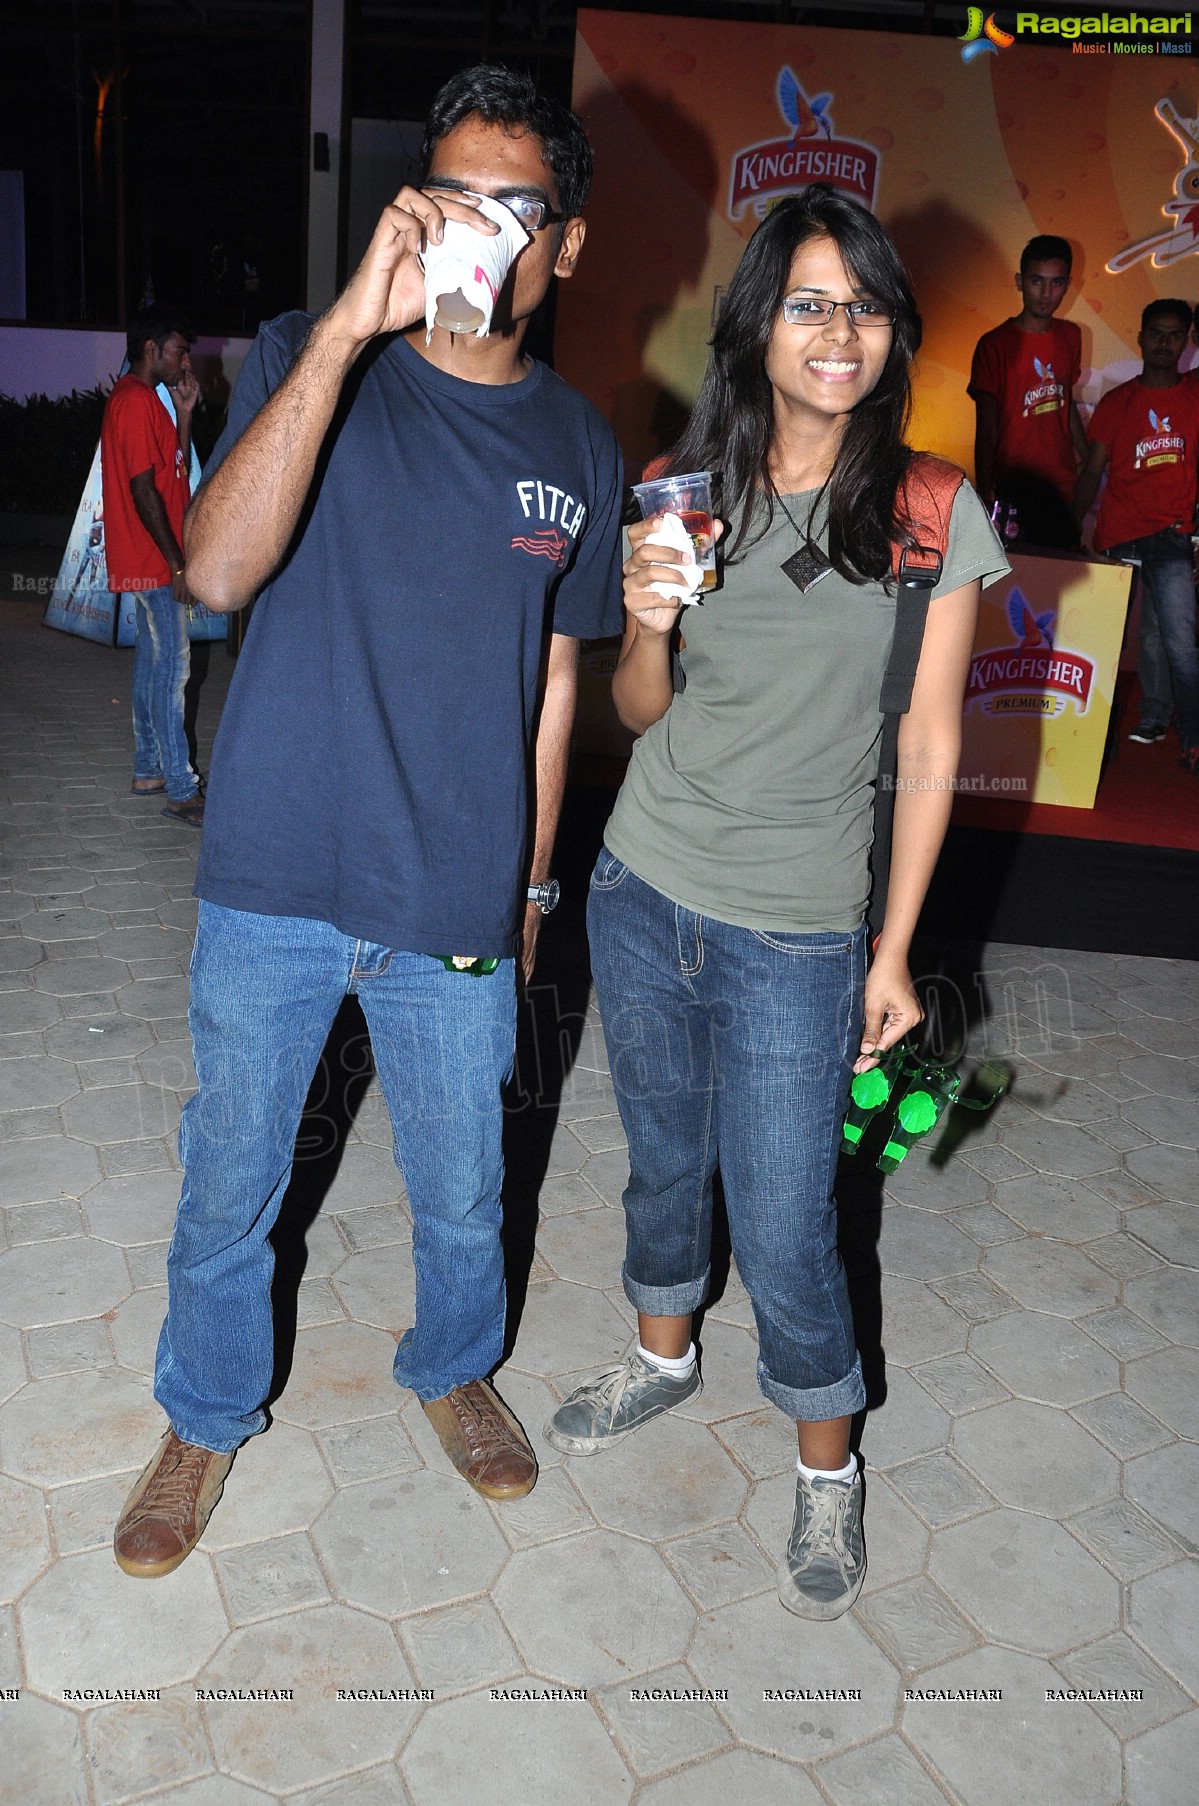 Kingfisher Premium – The Great Indian Octoberfest 2012, Hyderabad (Day 2)